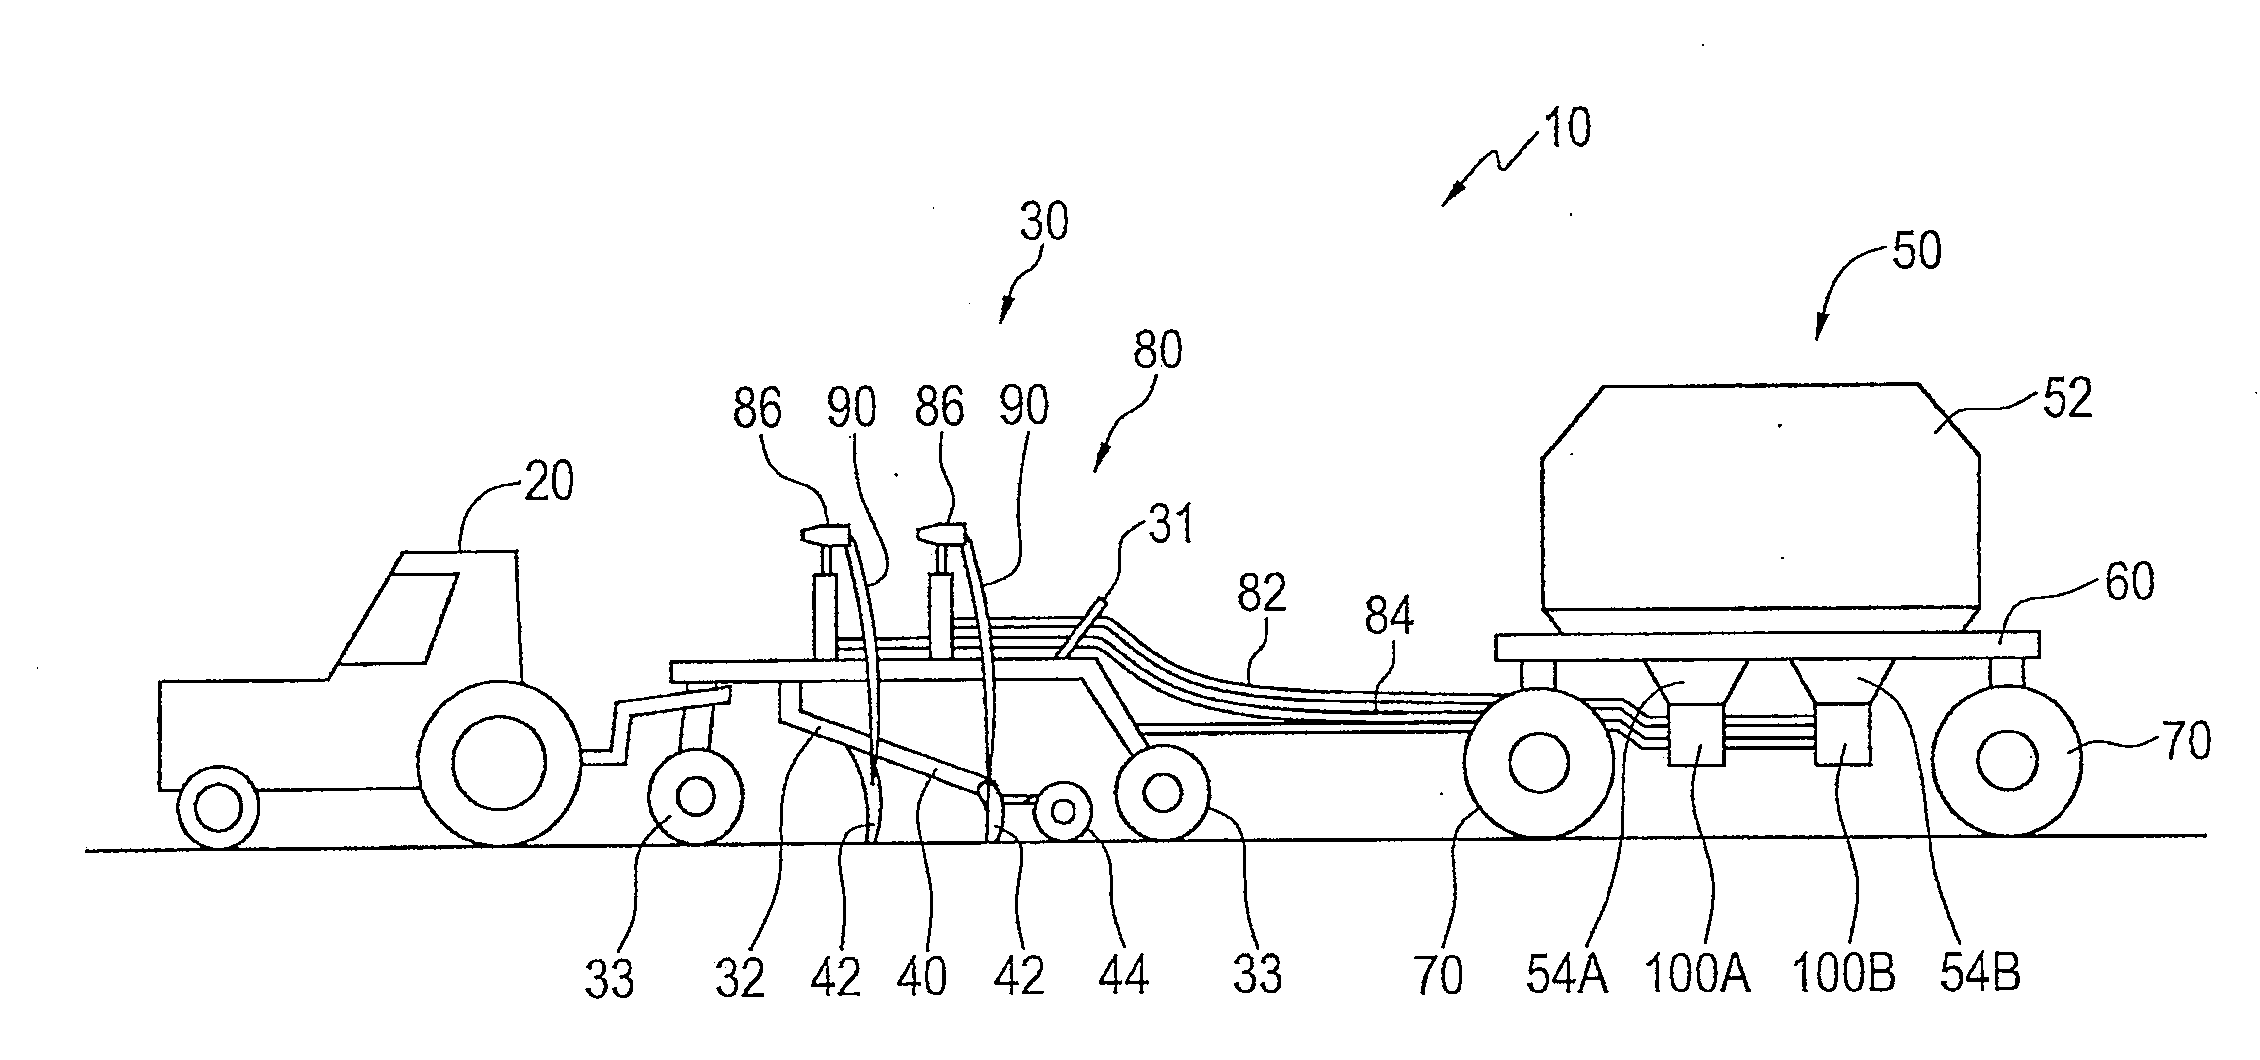 Metering assembly for an air seeder